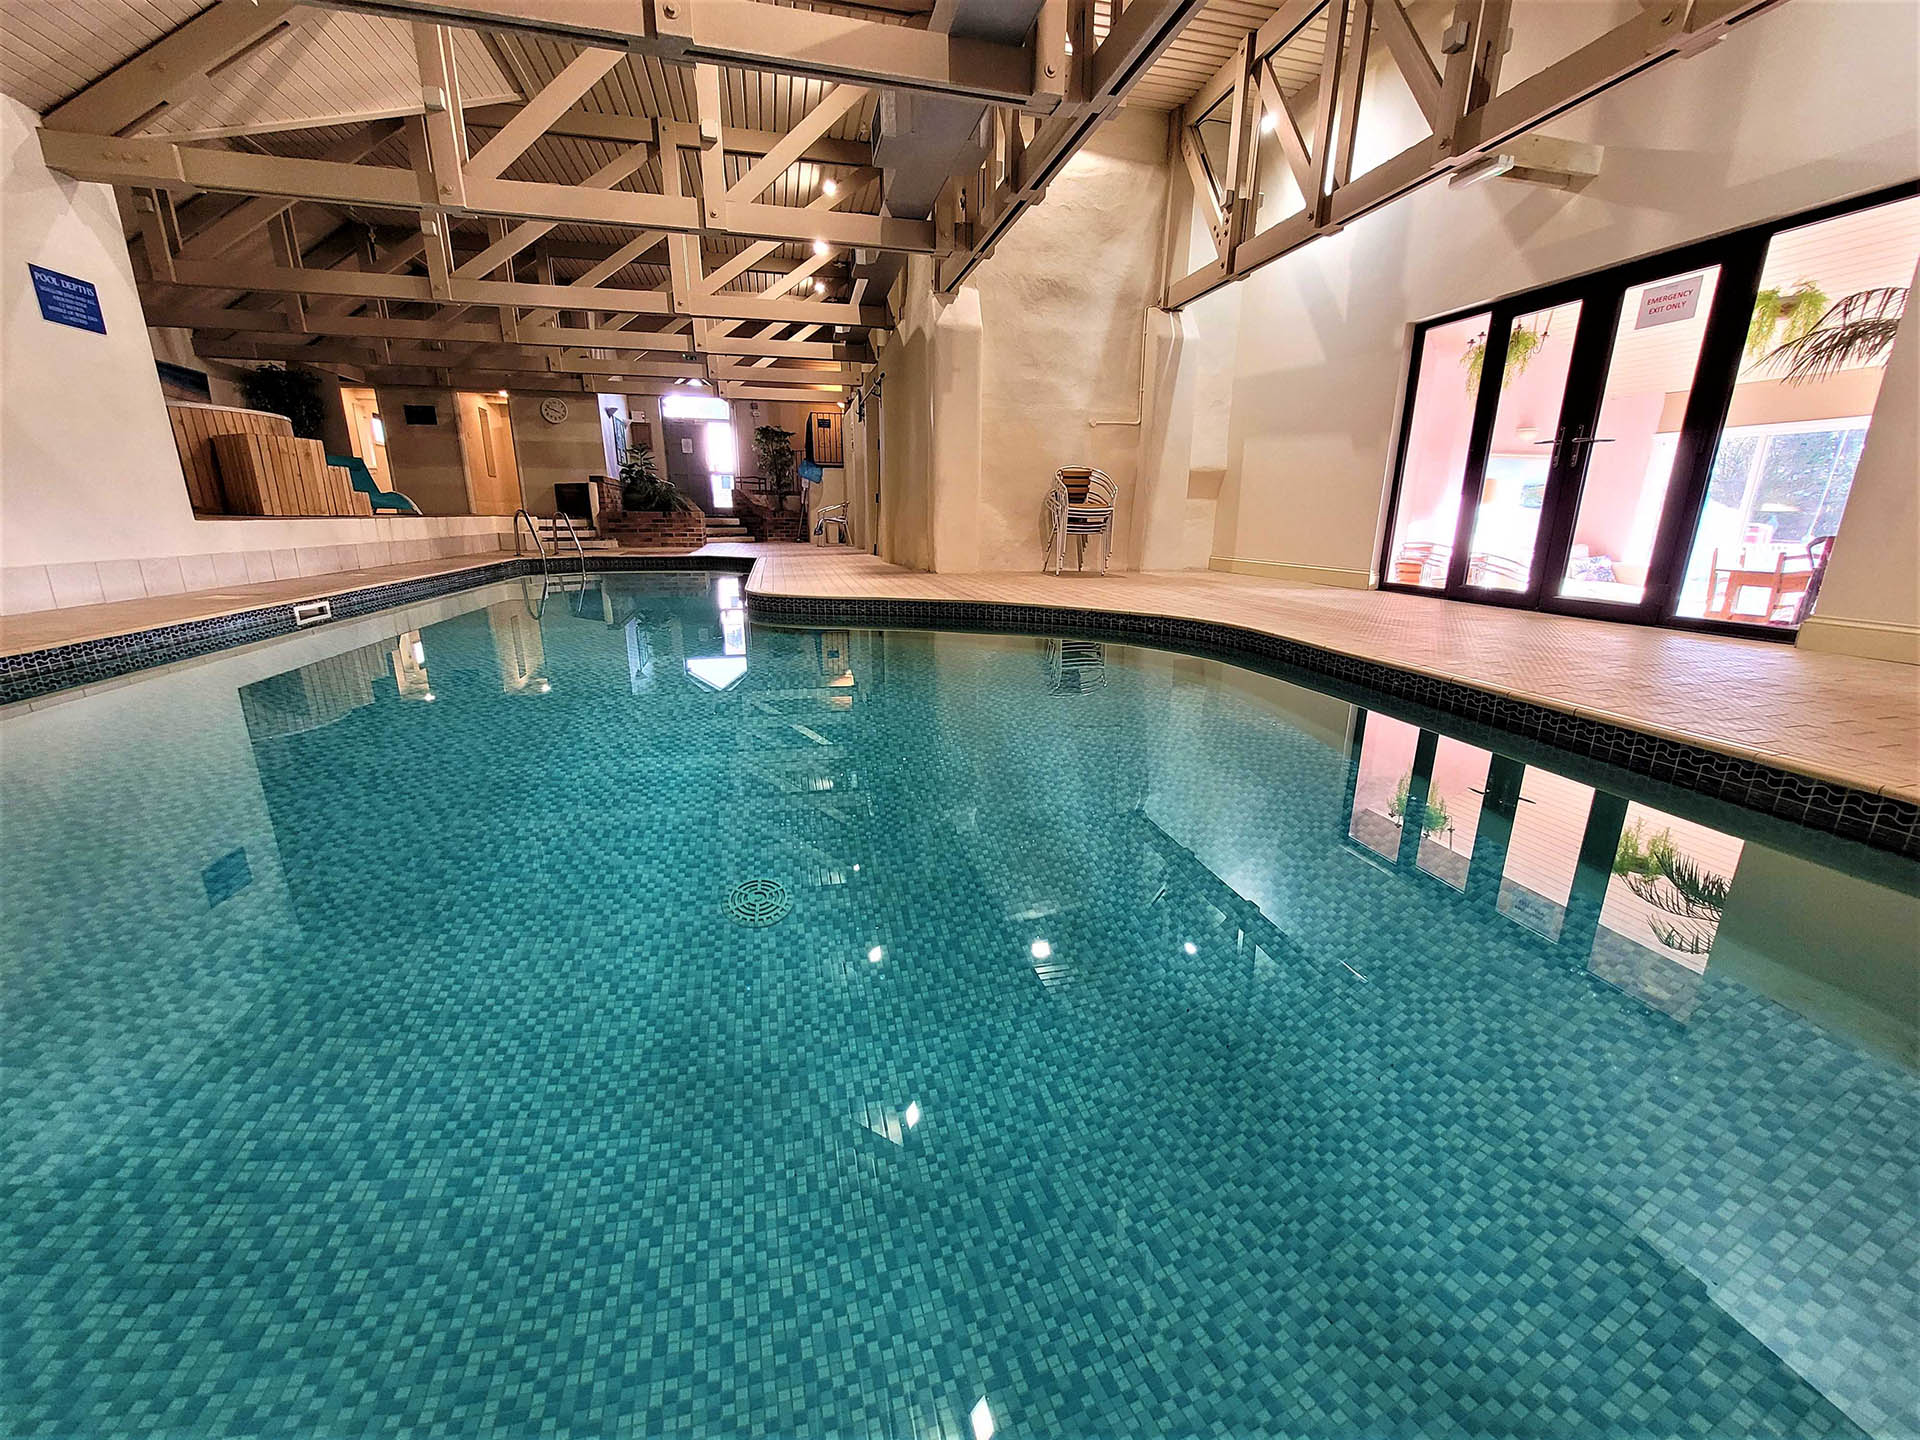 Indoor Poll with Hot Tub at Broomhill Manor holiday cottages Bude